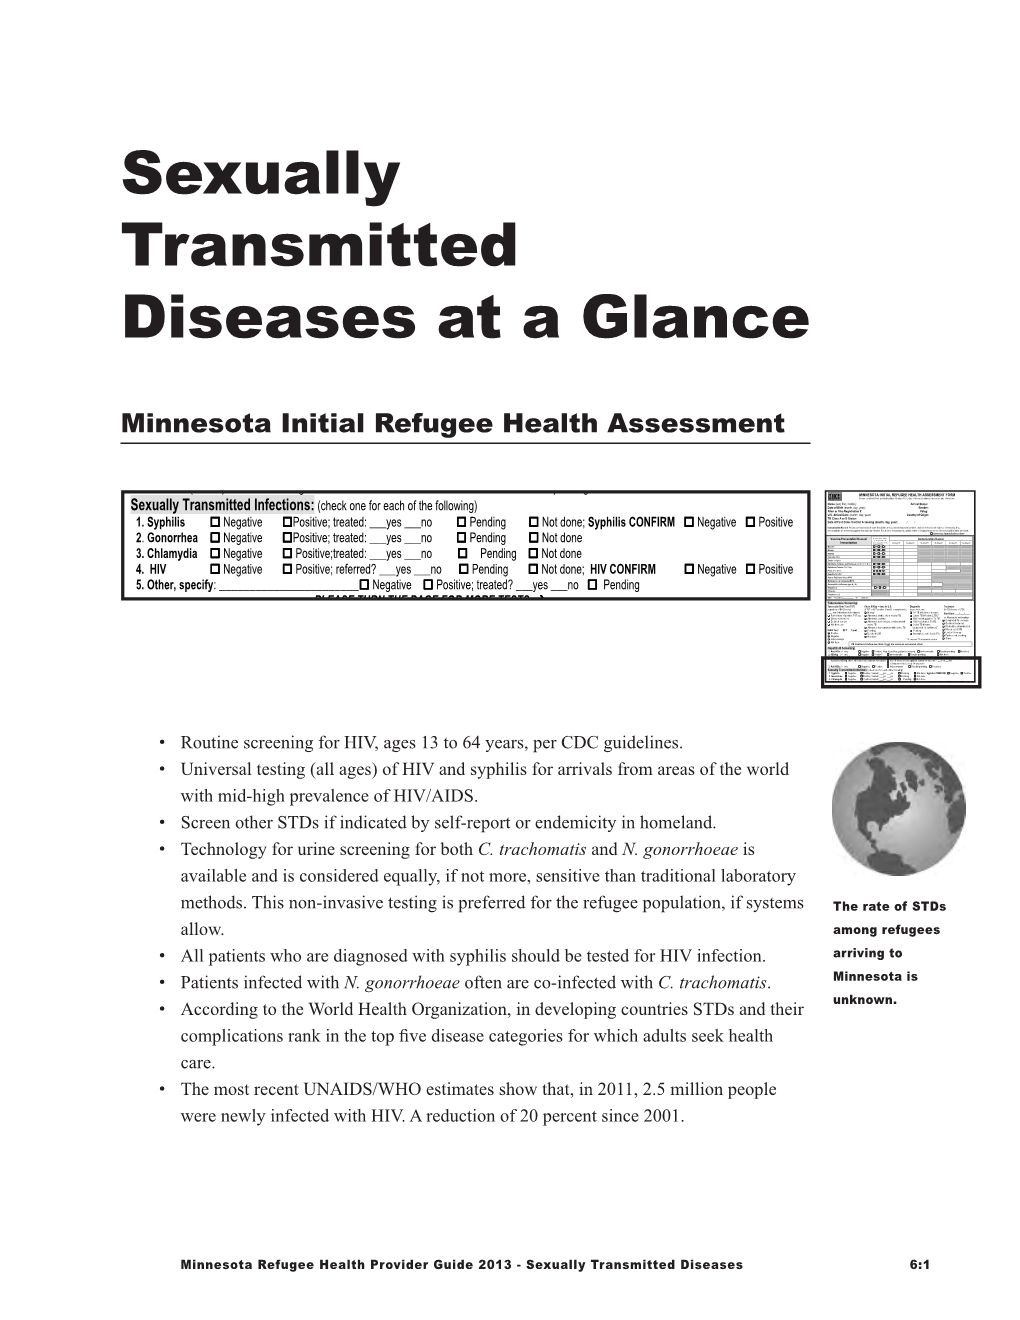 Sexually Transmitted Diseases 6:1 Key Resources